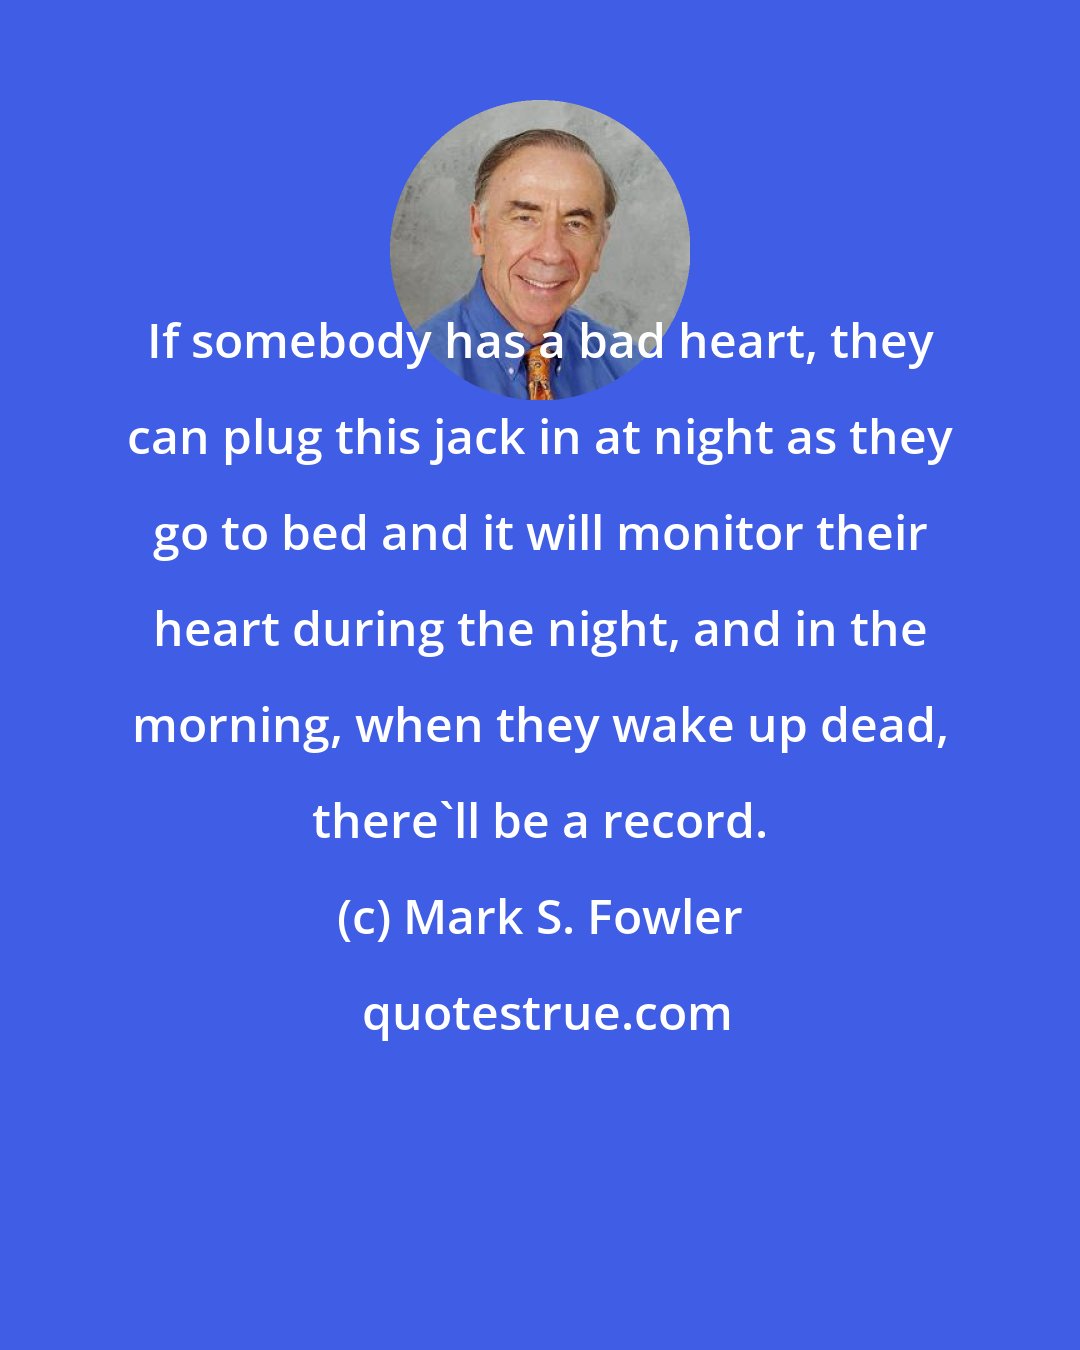 Mark S. Fowler: If somebody has a bad heart, they can plug this jack in at night as they go to bed and it will monitor their heart during the night, and in the morning, when they wake up dead, there'll be a record.